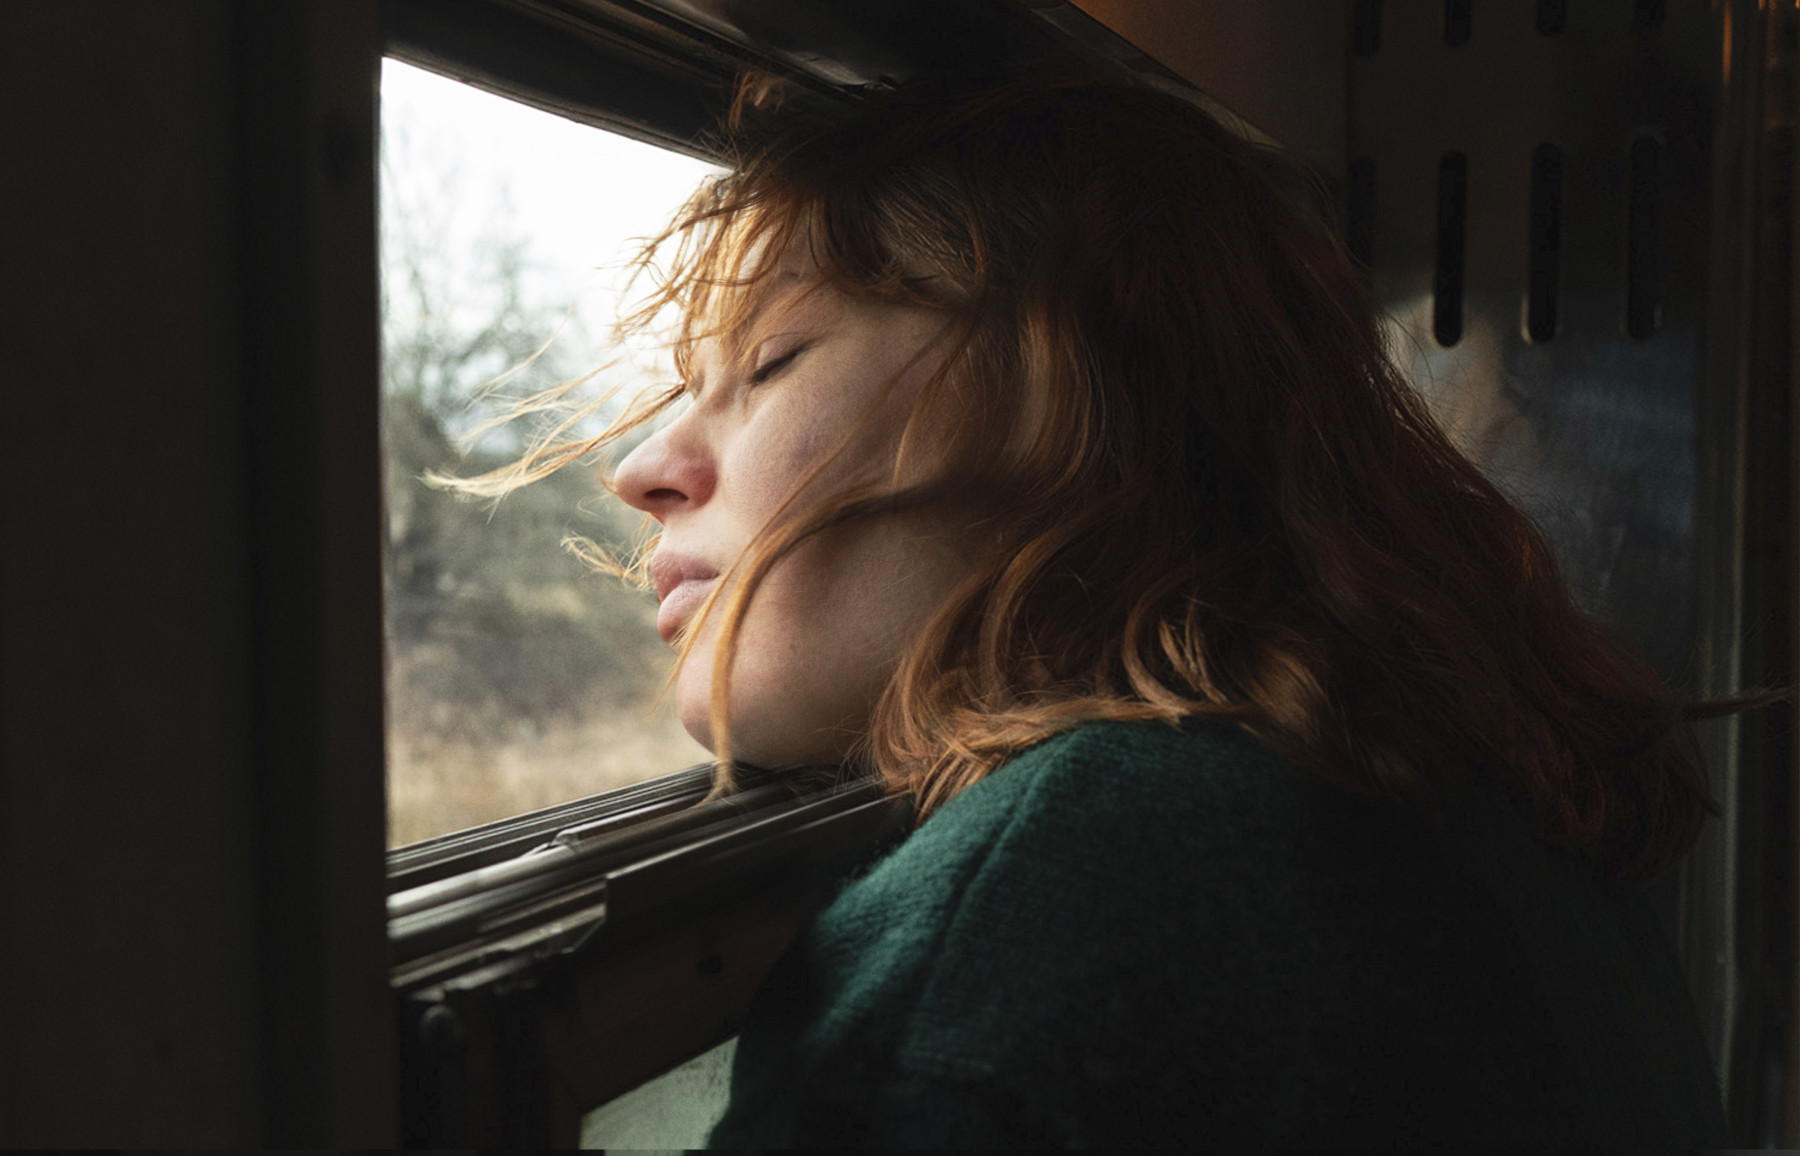 With her eyes closed, a woman lets her hair blow in the breeze at an open train window.